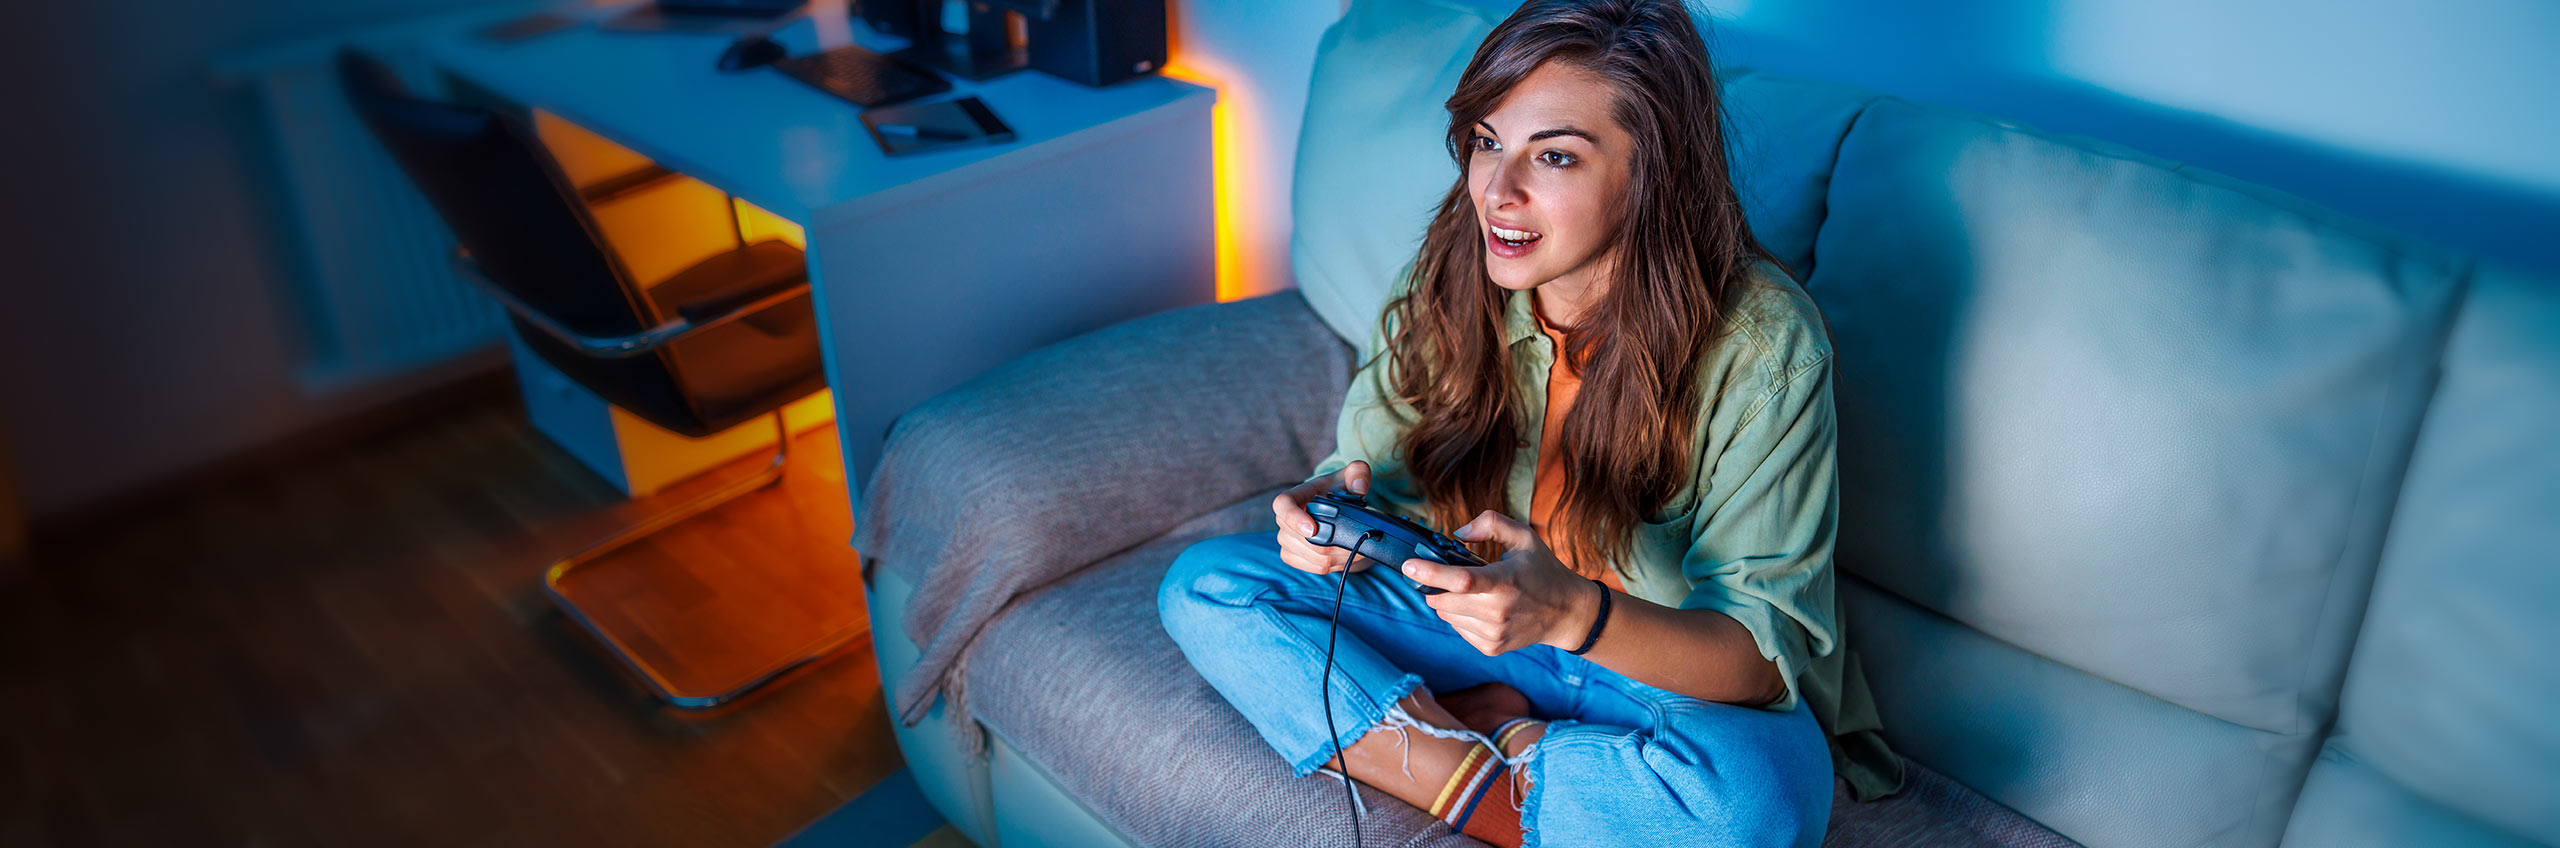 Woman gaming on her couch at home